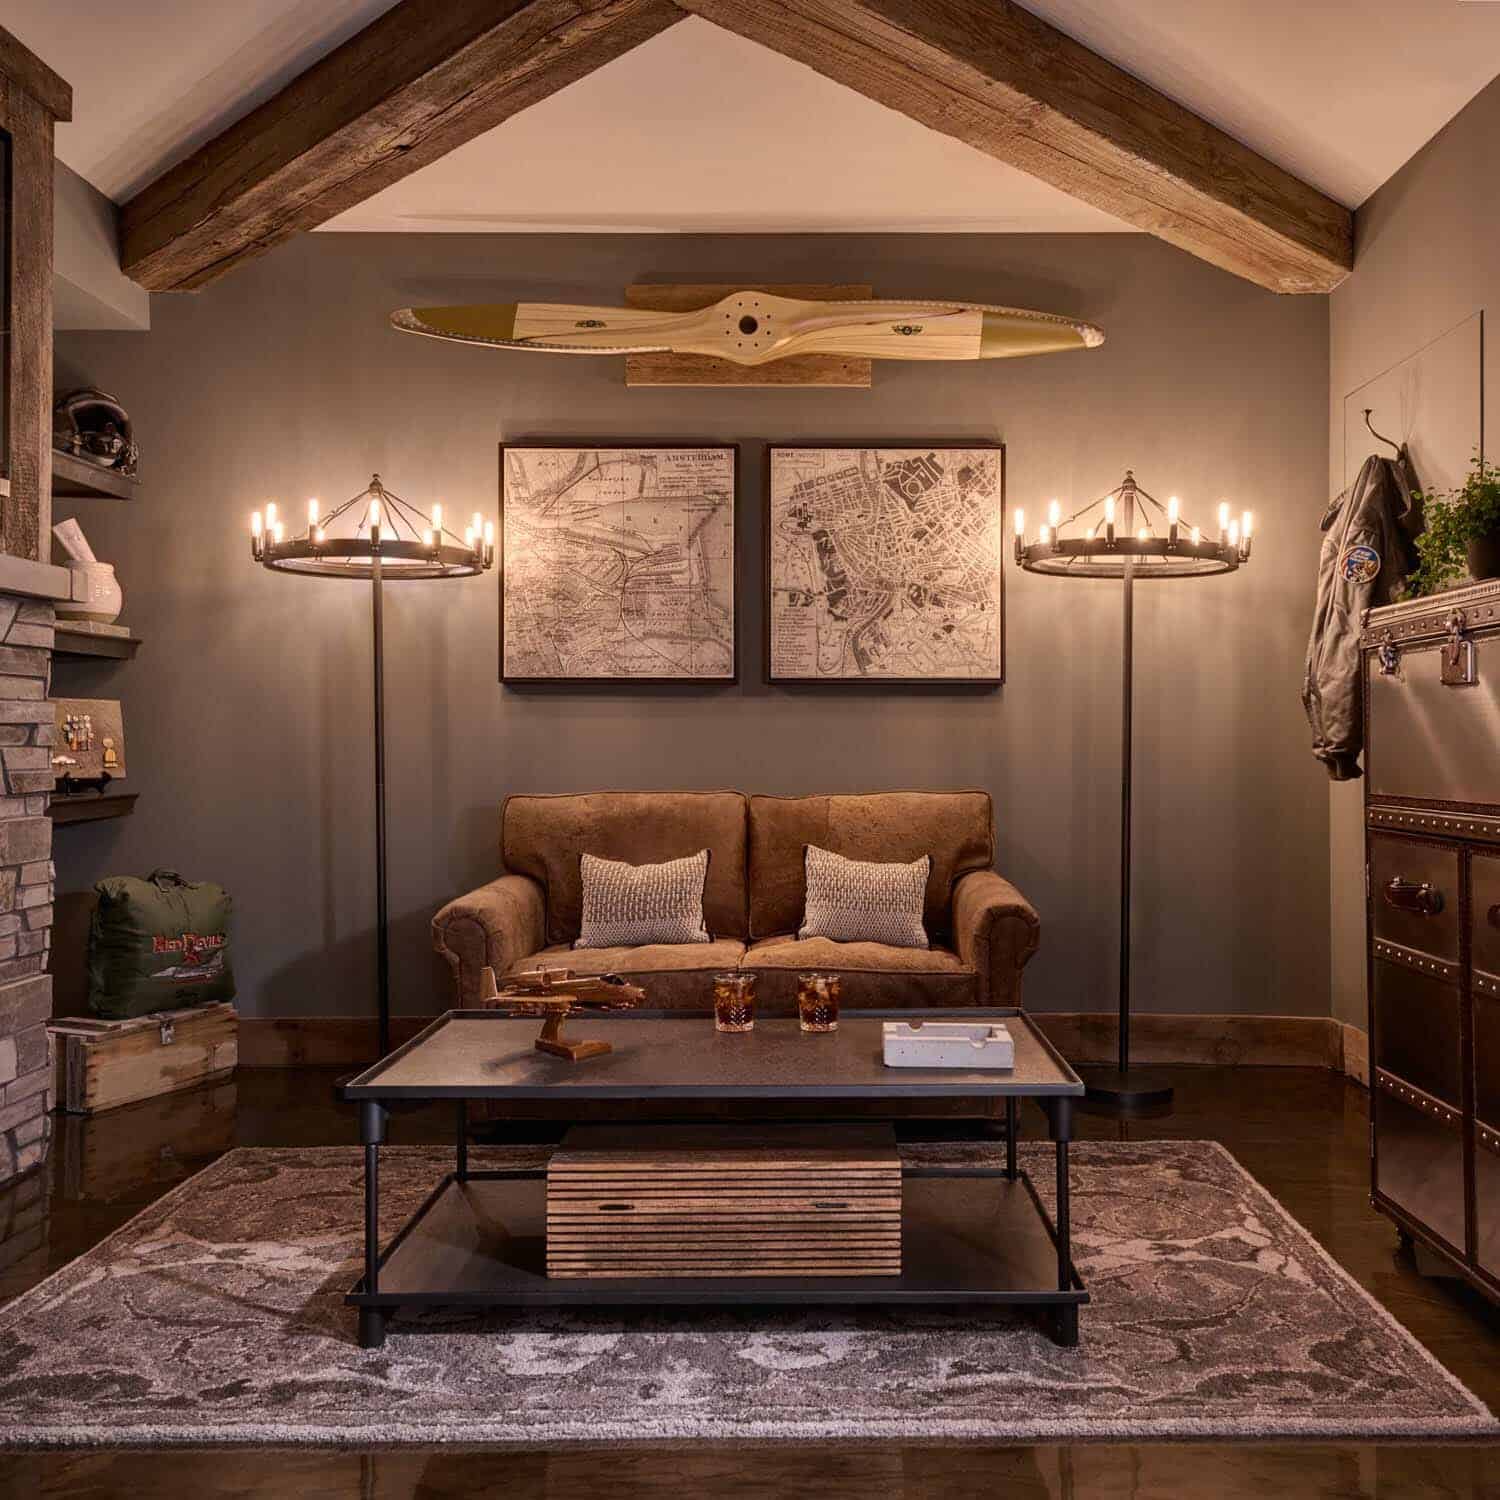 Restoration Hardware styled model home with